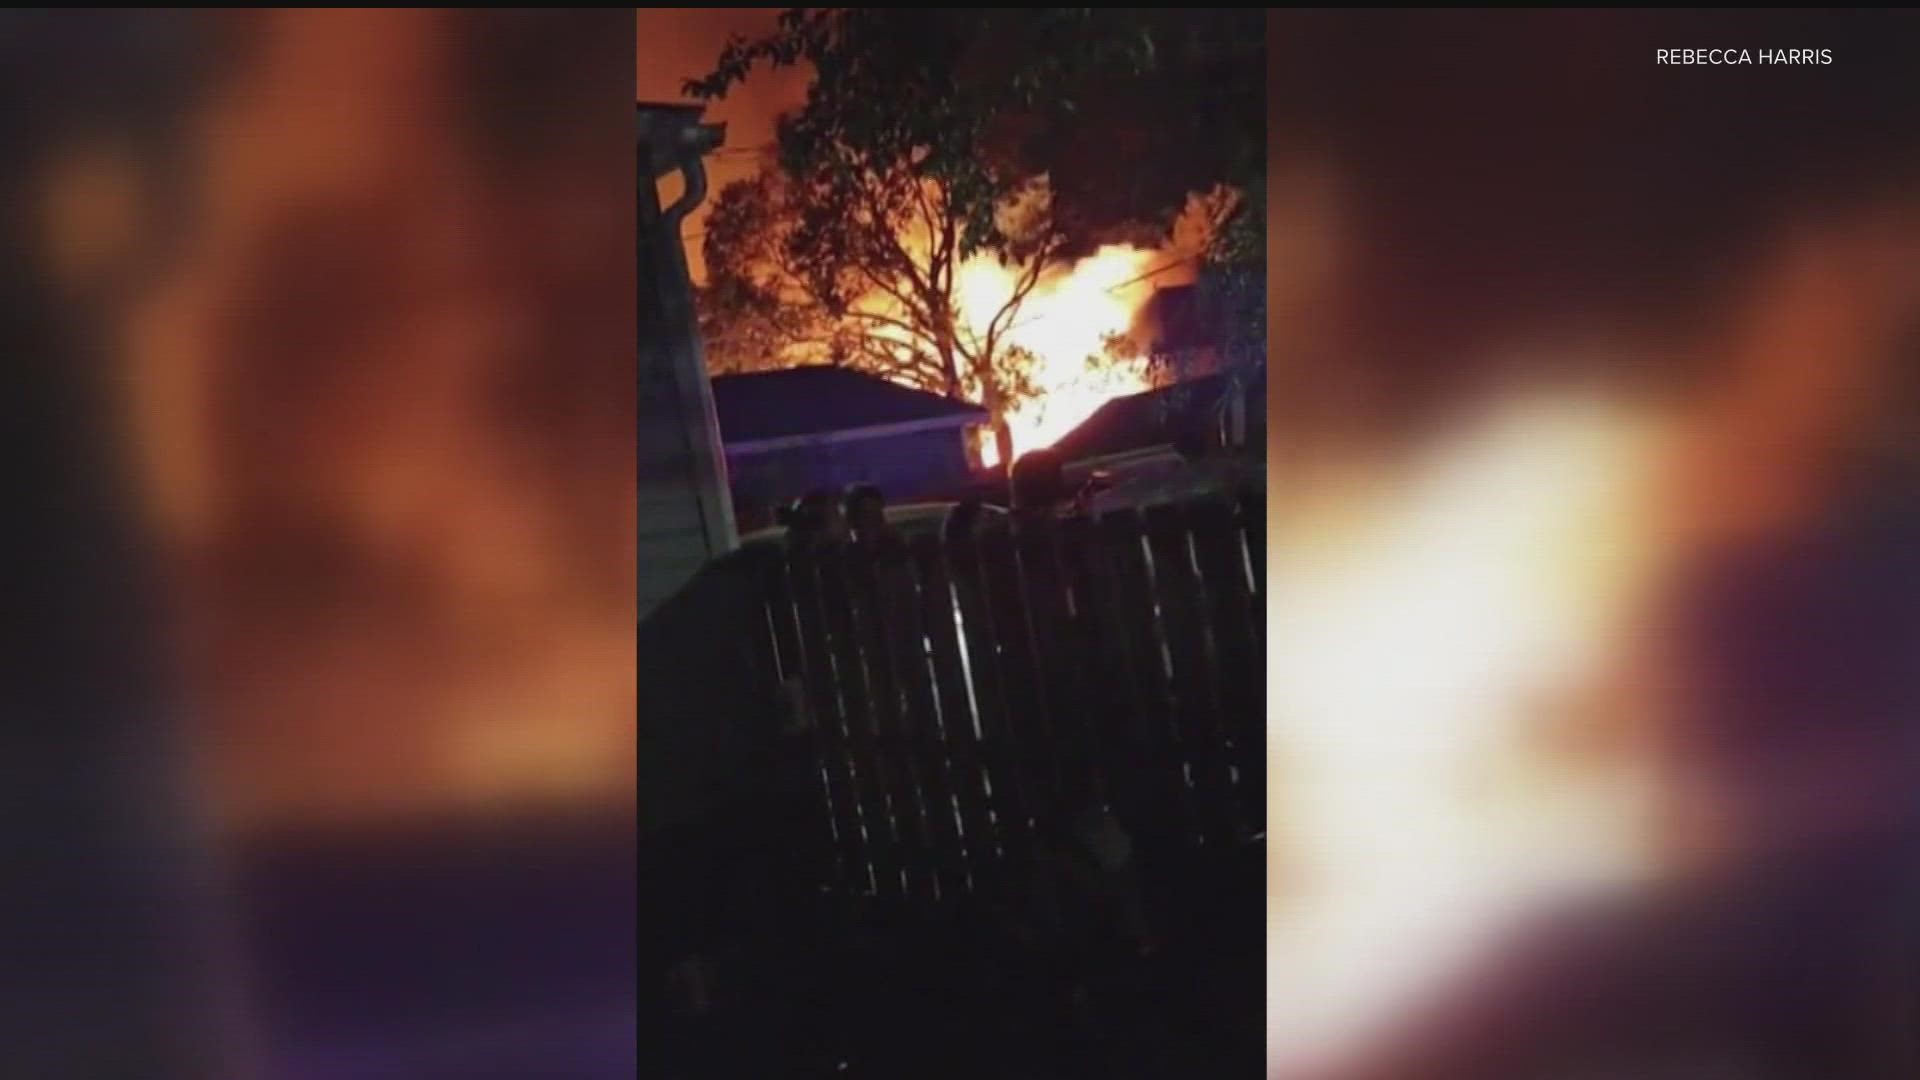 Three buildings were affected by a blaze that may have started from a vacant home.